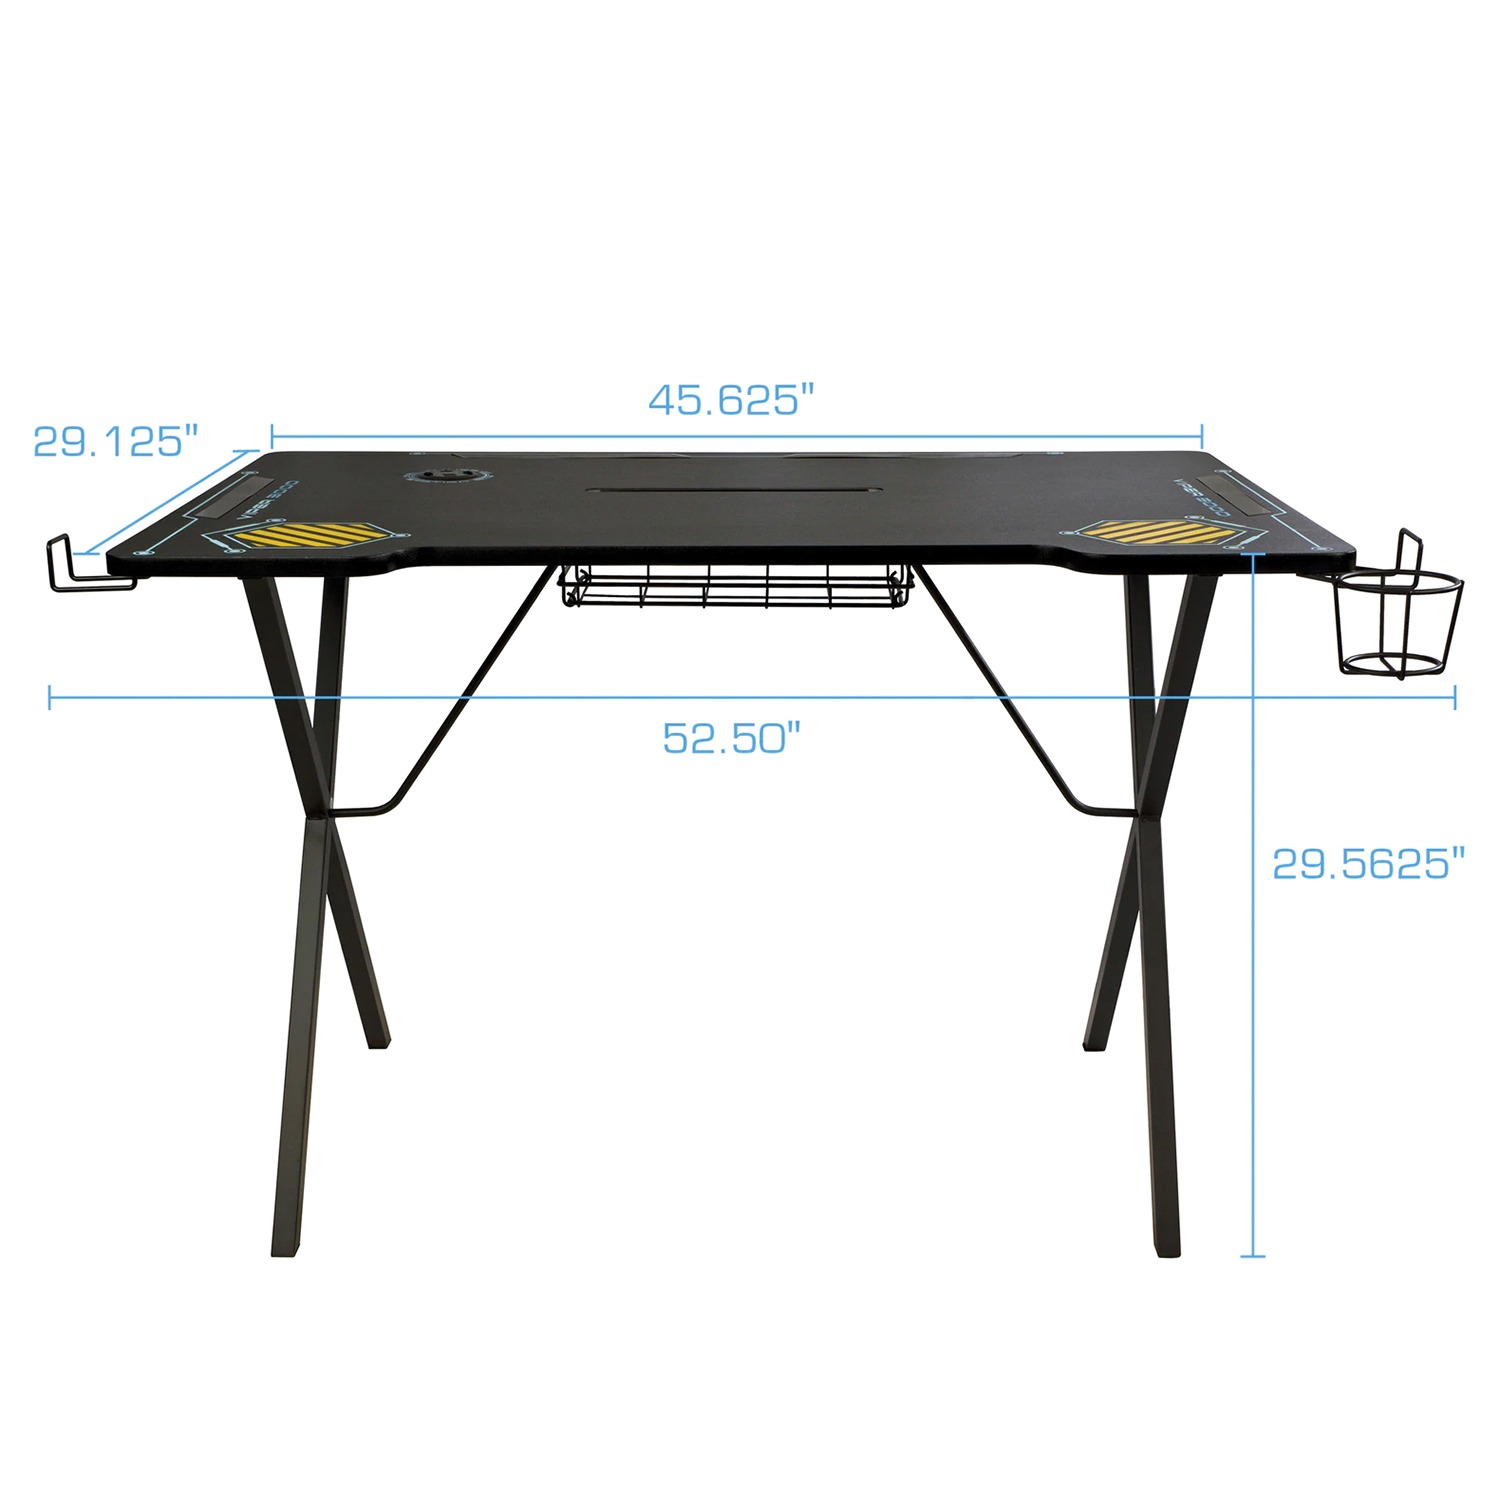 Atlantic Viper 3000 Gaming Desk with LED Lights, 52.5"W x 32.5" D x 29.6"H, Black - image 3 of 8